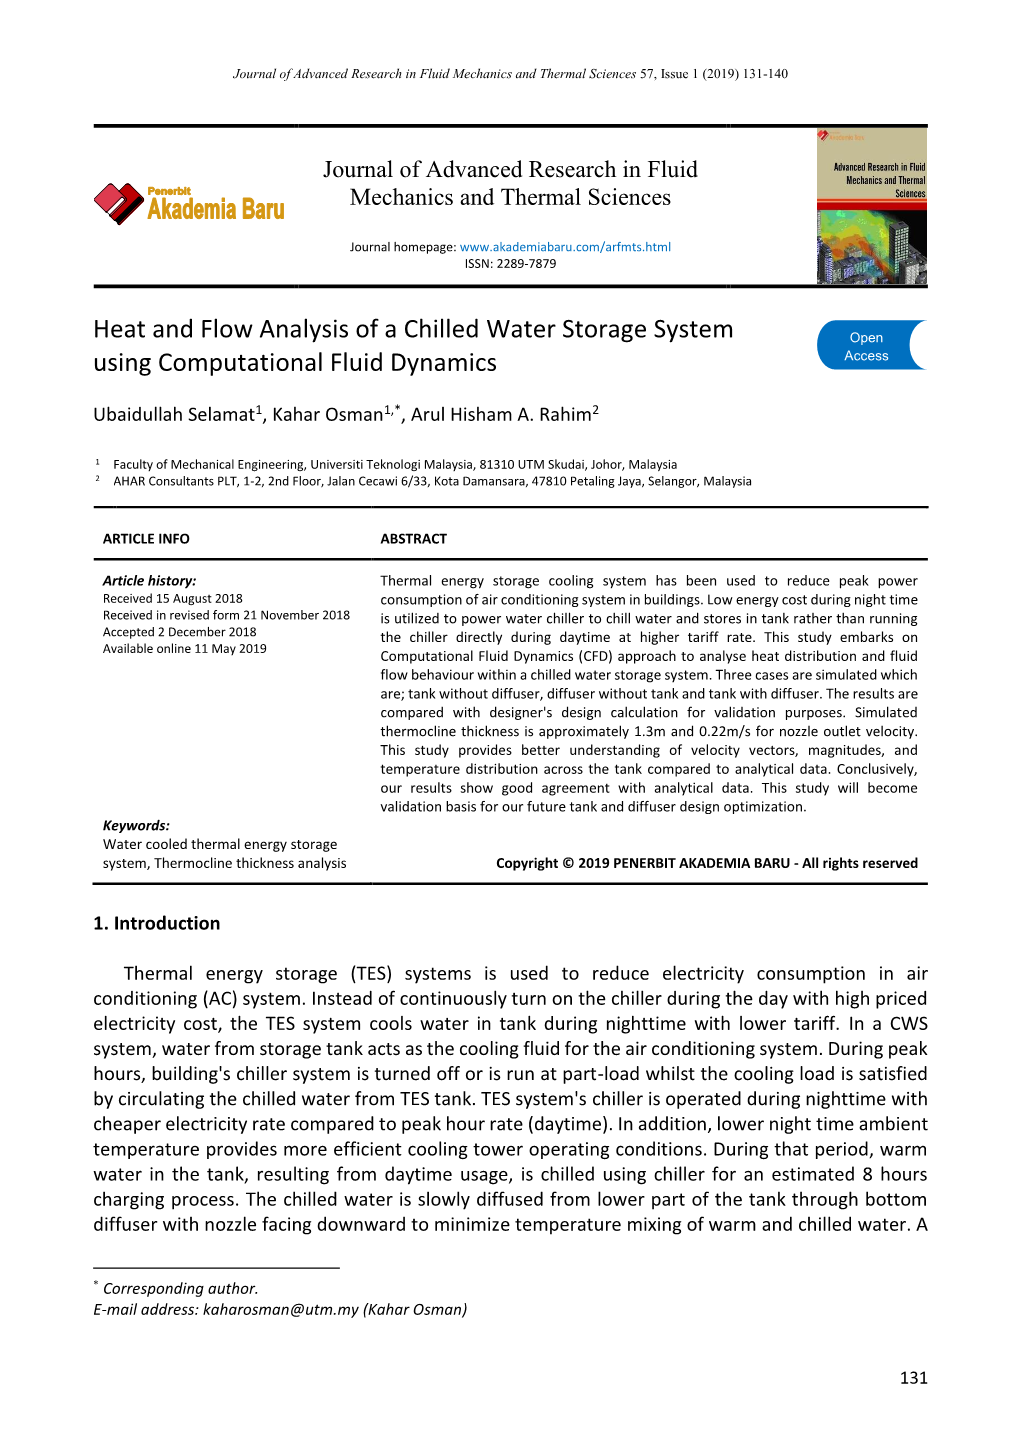 Heat and Flow Analysis of a Chilled Water Storage System Using